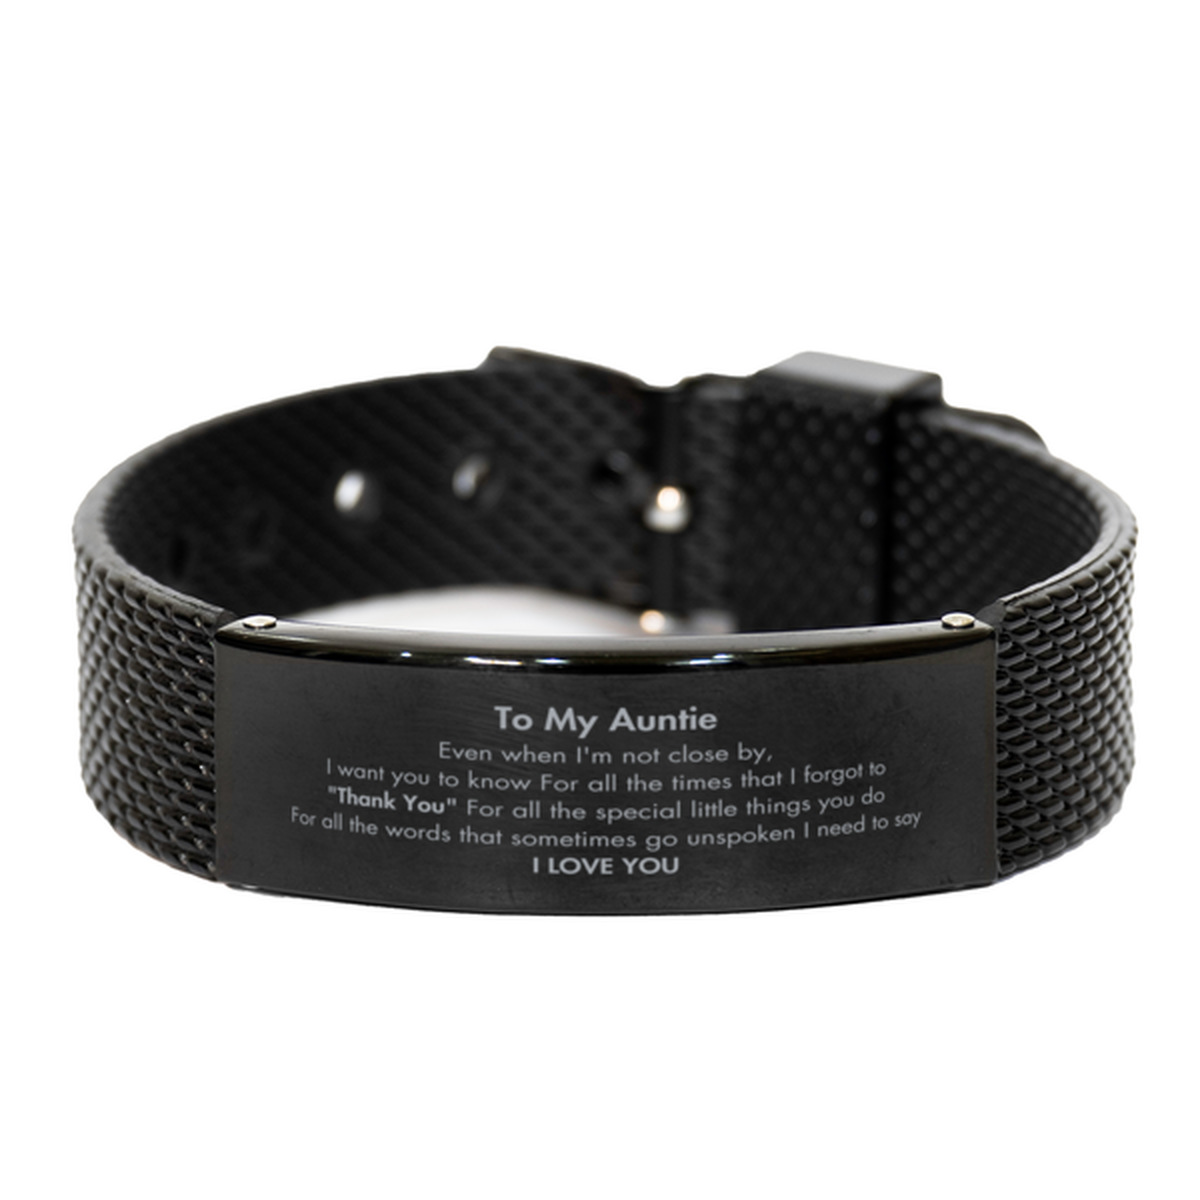 Thank You Gifts for Auntie, Keepsake Black Shark Mesh Bracelet Gifts for Auntie Birthday Mother's day Father's Day Auntie For all the words That sometimes go unspoken I need to say I LOVE YOU